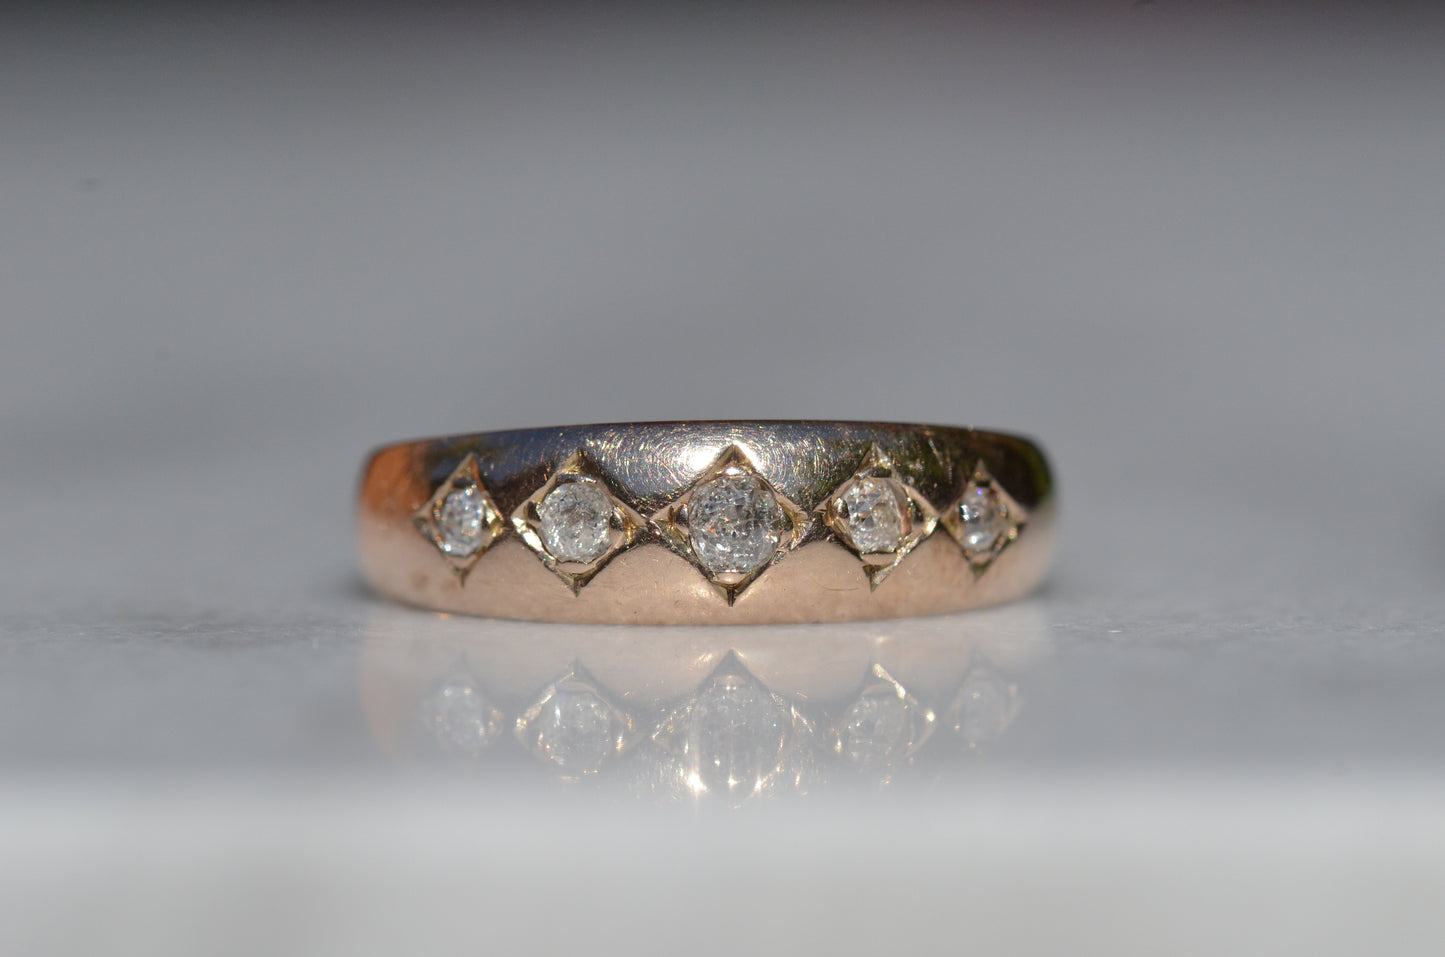 A tightly-cropped macro shot of the Victorian ring, showing the hand-cut diamond-shaped frames that hold each cushion-shaped stone. The old mine cut diamonds have internal fractures and inclusions but still sparkle in the direct sun, and the gold is weathered from a century of wear. The ring is facing head-on.